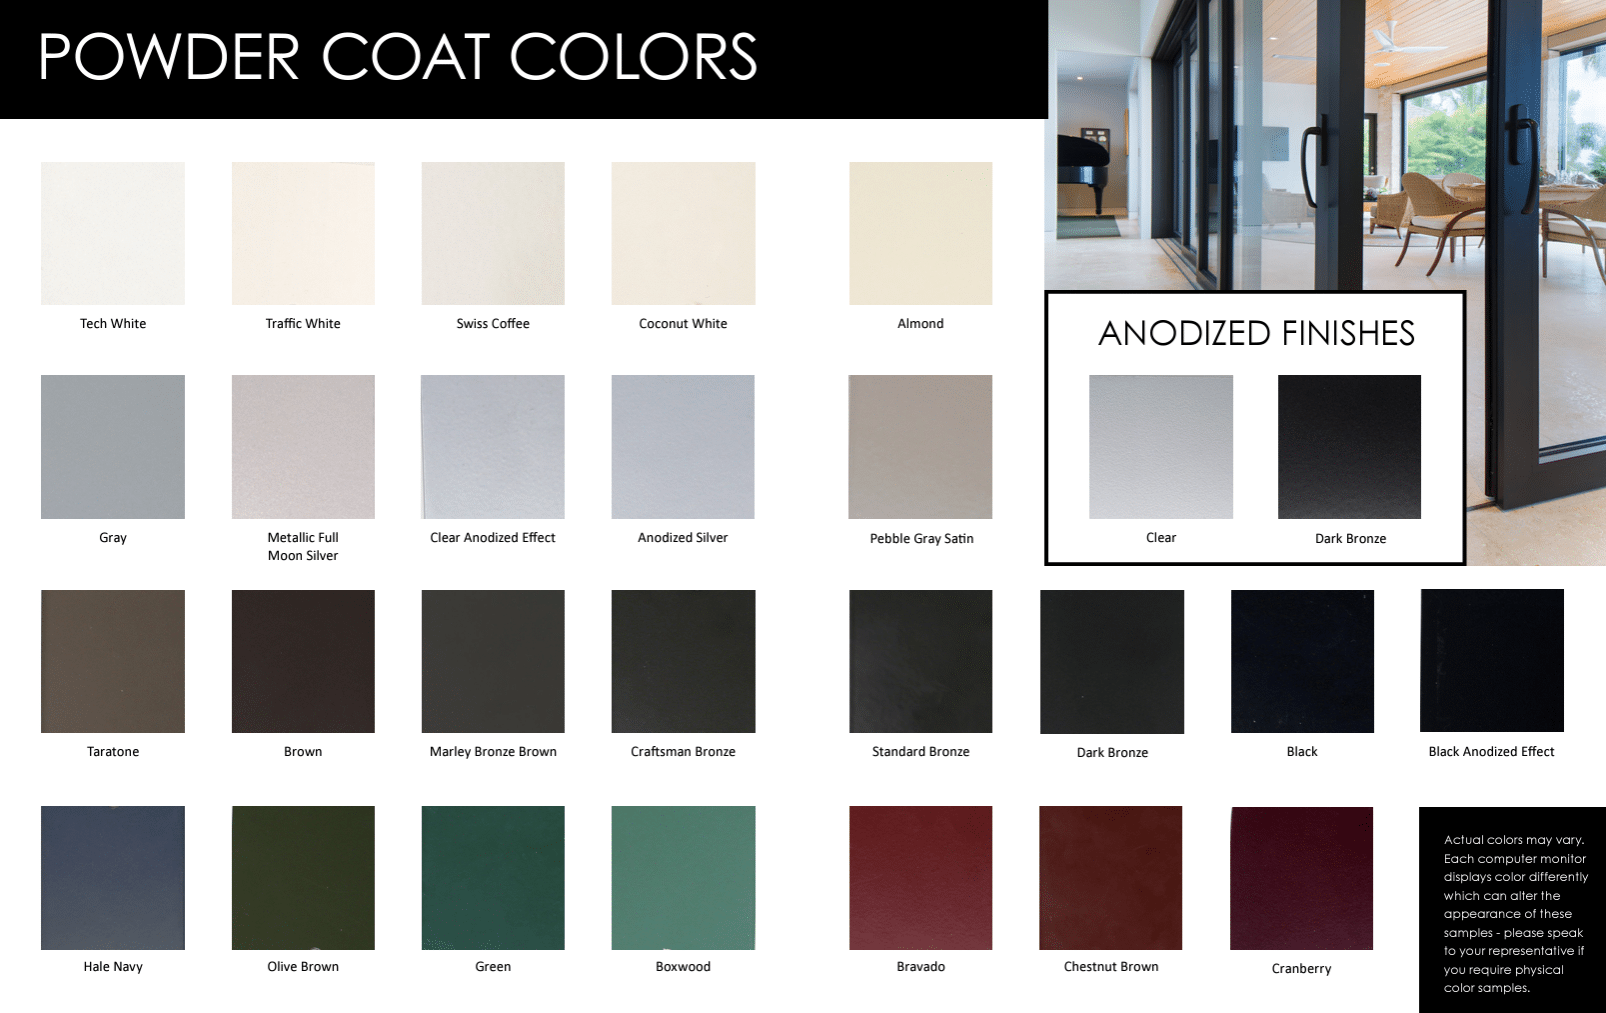 We offer 25 powder coat finish options as the standard AAMA 2604; and metallic/bonded powder coat, anodized, Kynar, and Duranar finishes for your glass doors. These finishes ensure that your windows are durable and can be color-matched to your design